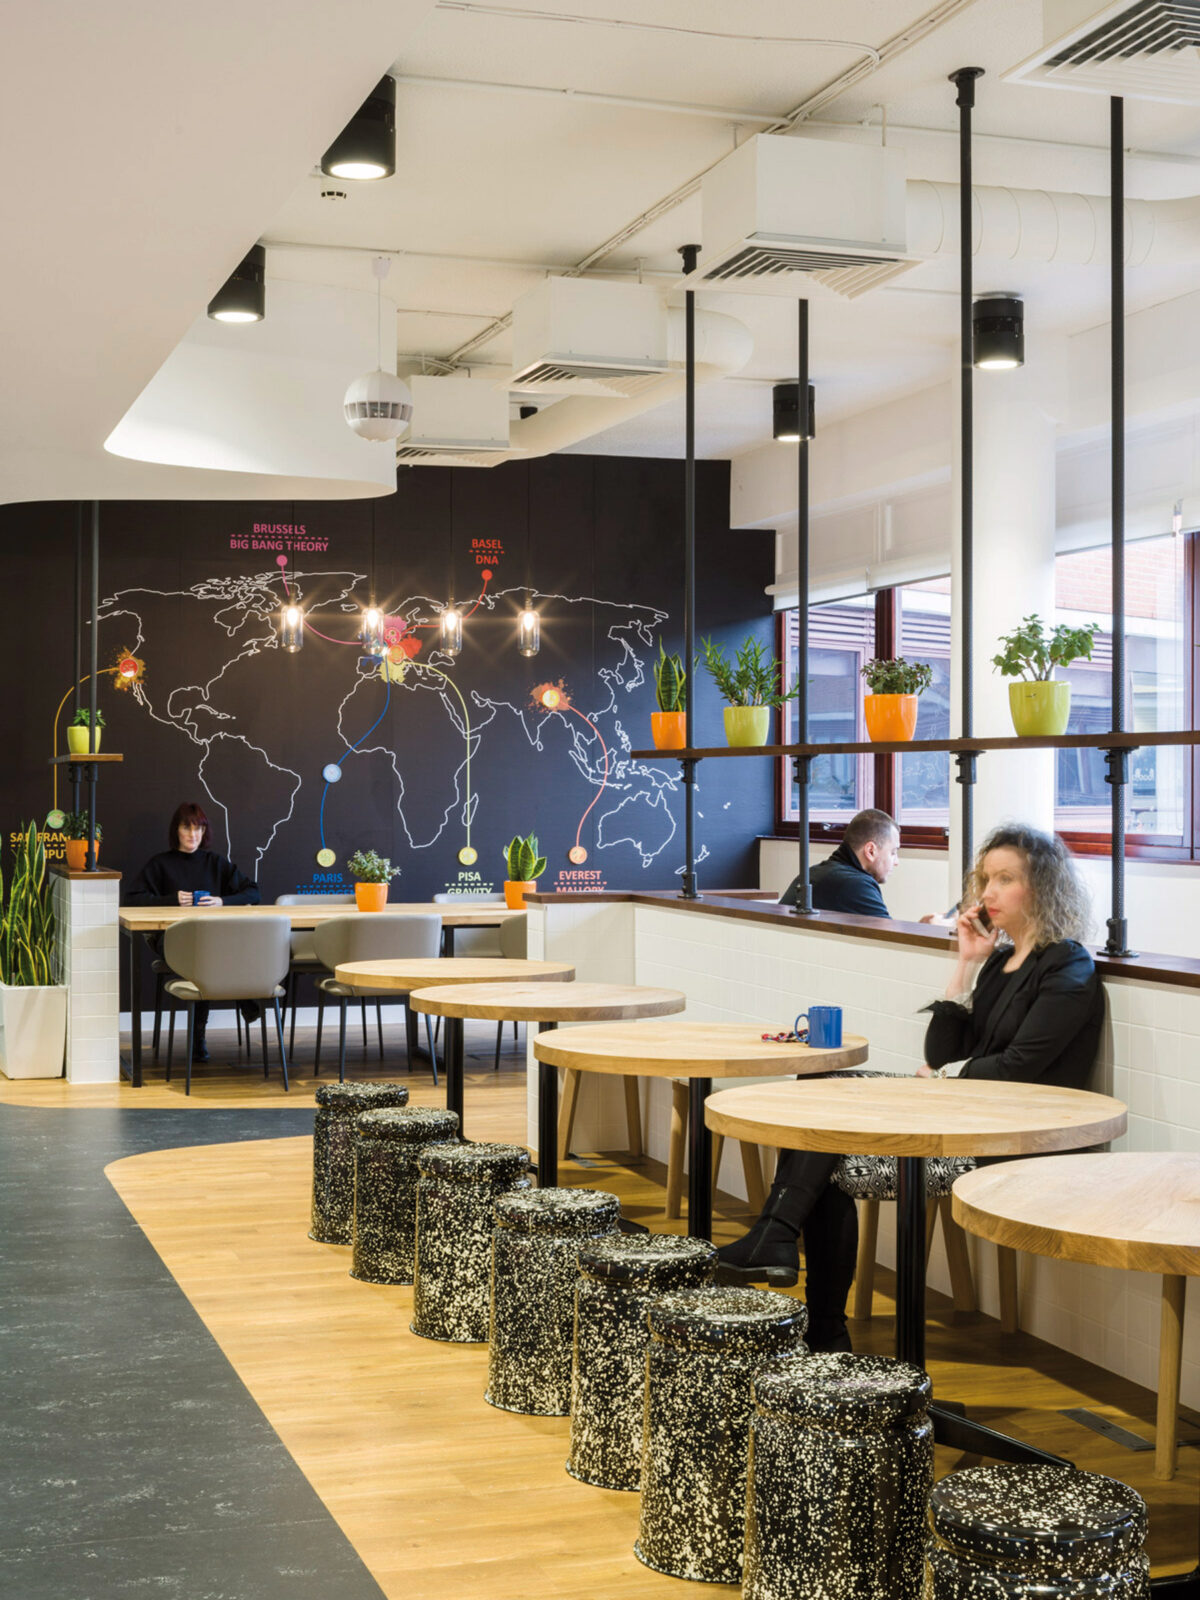 Modern cafeteria space featuring black walls adorned with a vibrant world map mural, eclectic pendant lighting, and a mix of terrazzo stools and wooden tables. Natural light complements the bright accents of decorative planters, merging global inspiration with contemporary design.